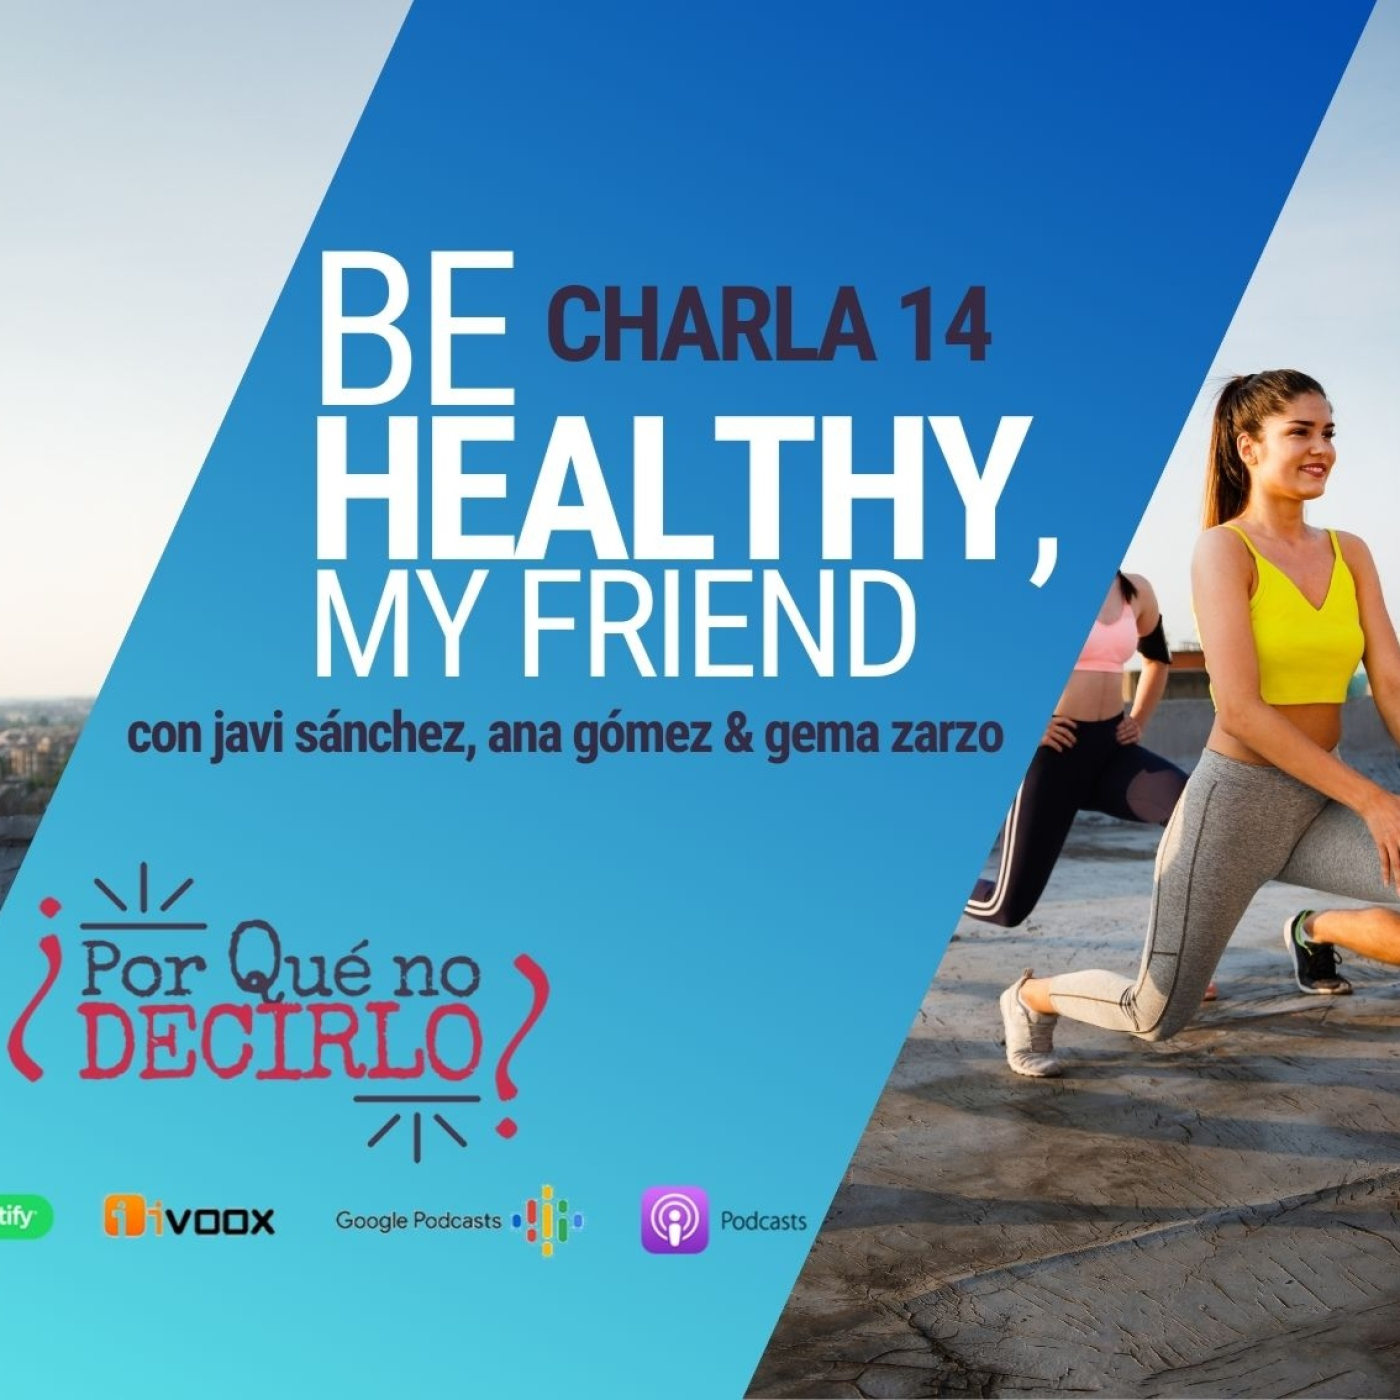 Charla 14   BE HEALTHY, my friend (parte 1)